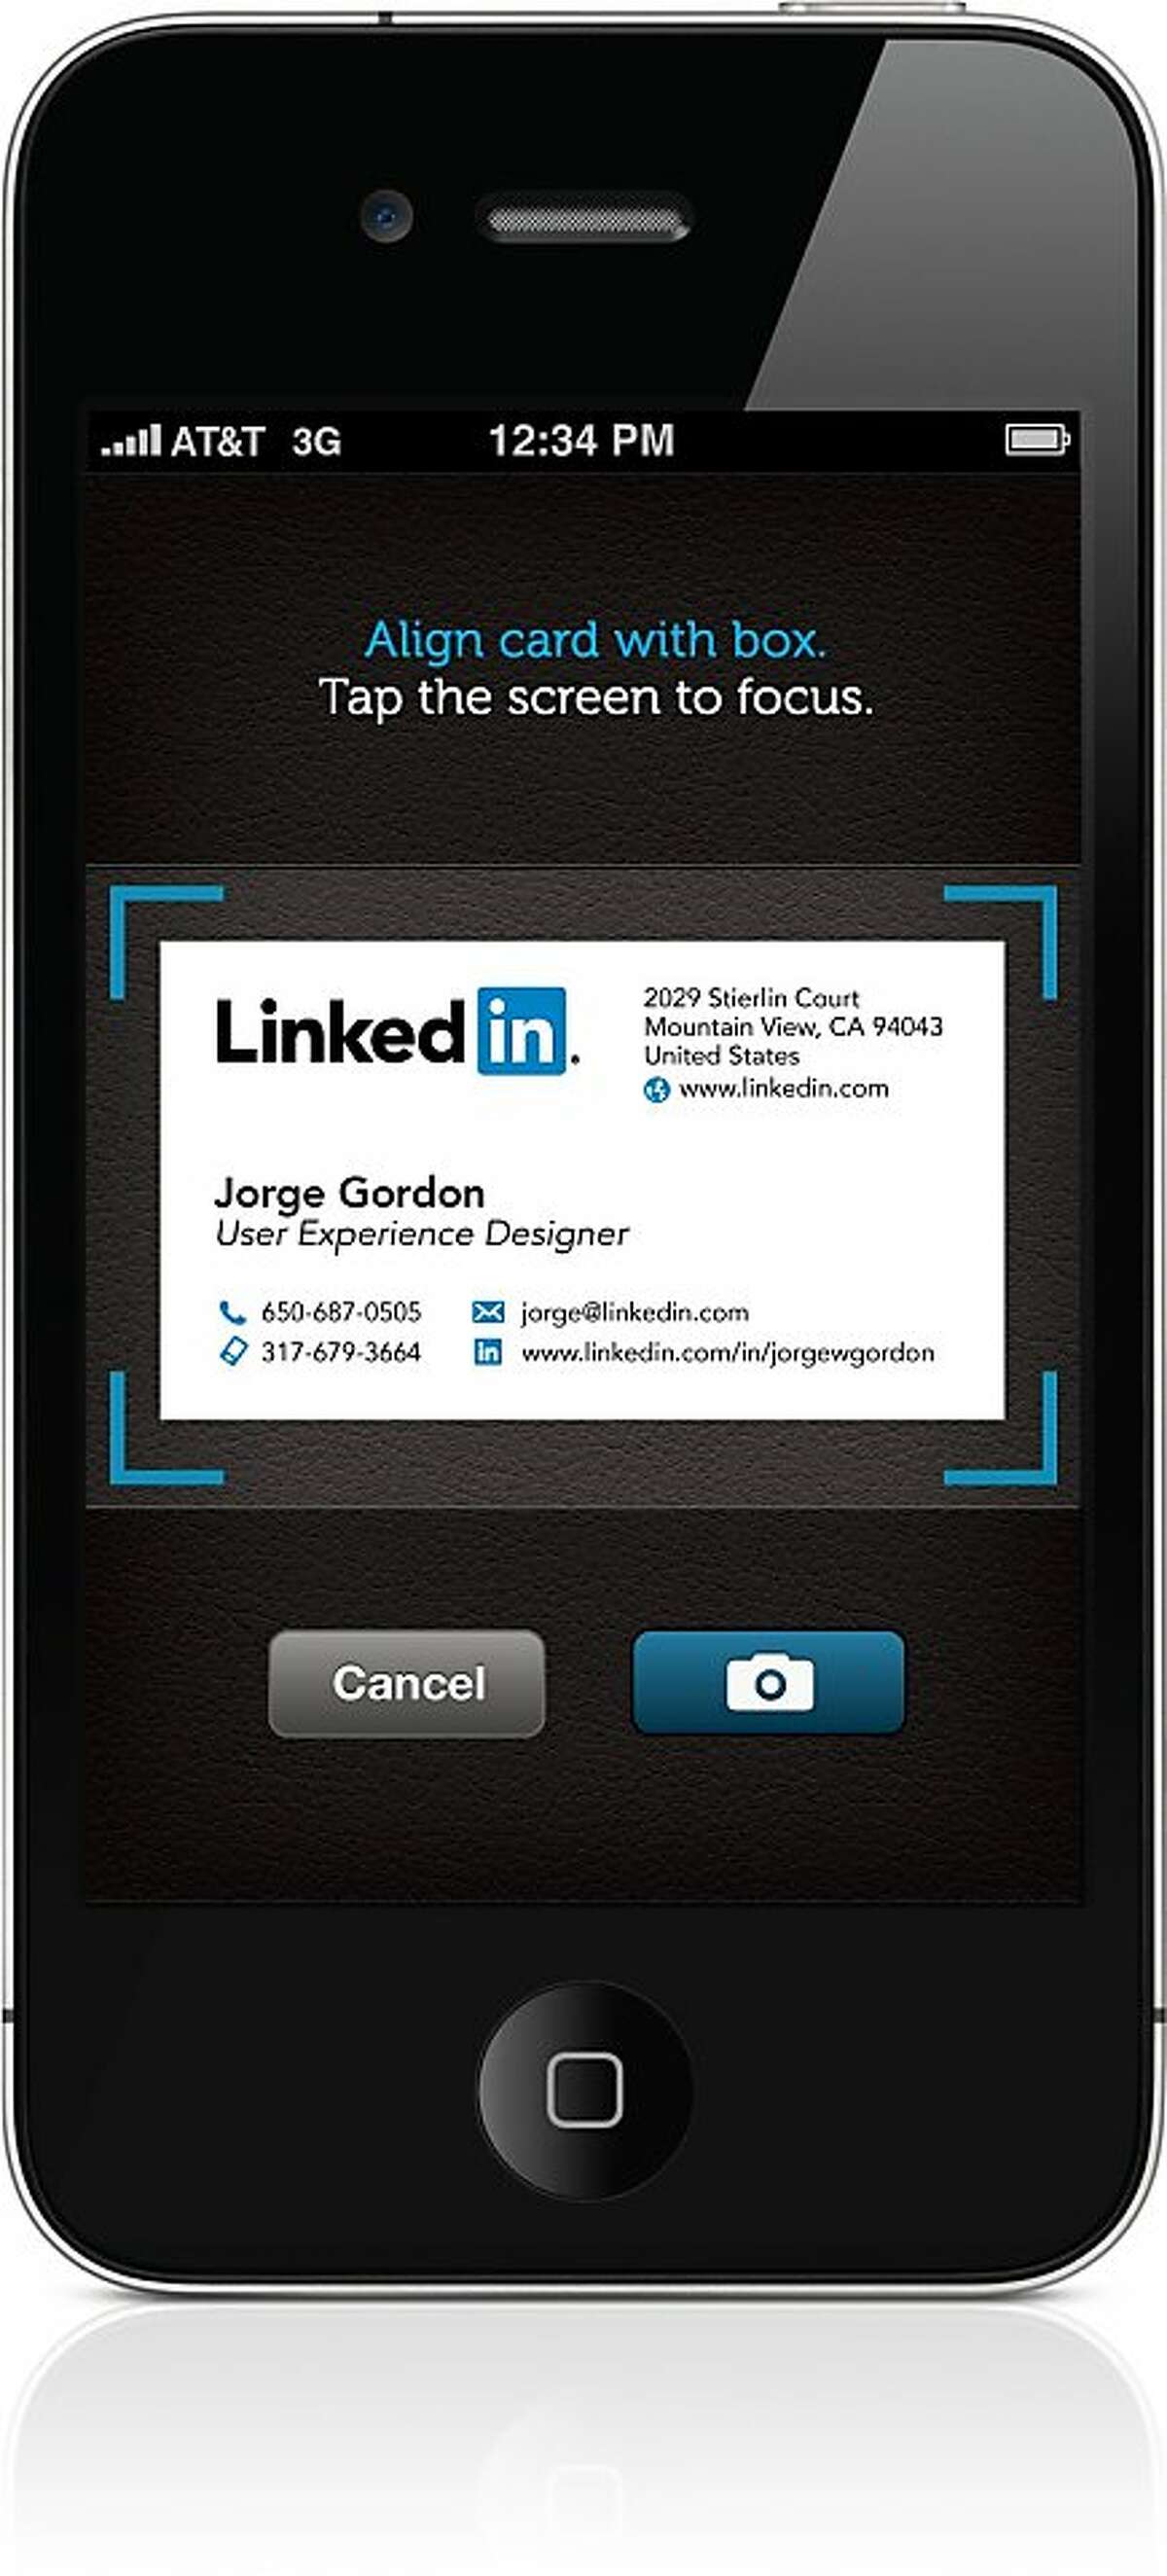 An undate screenshot of LinkedIn's iphone app which takes pictures of business cards and organizes them.